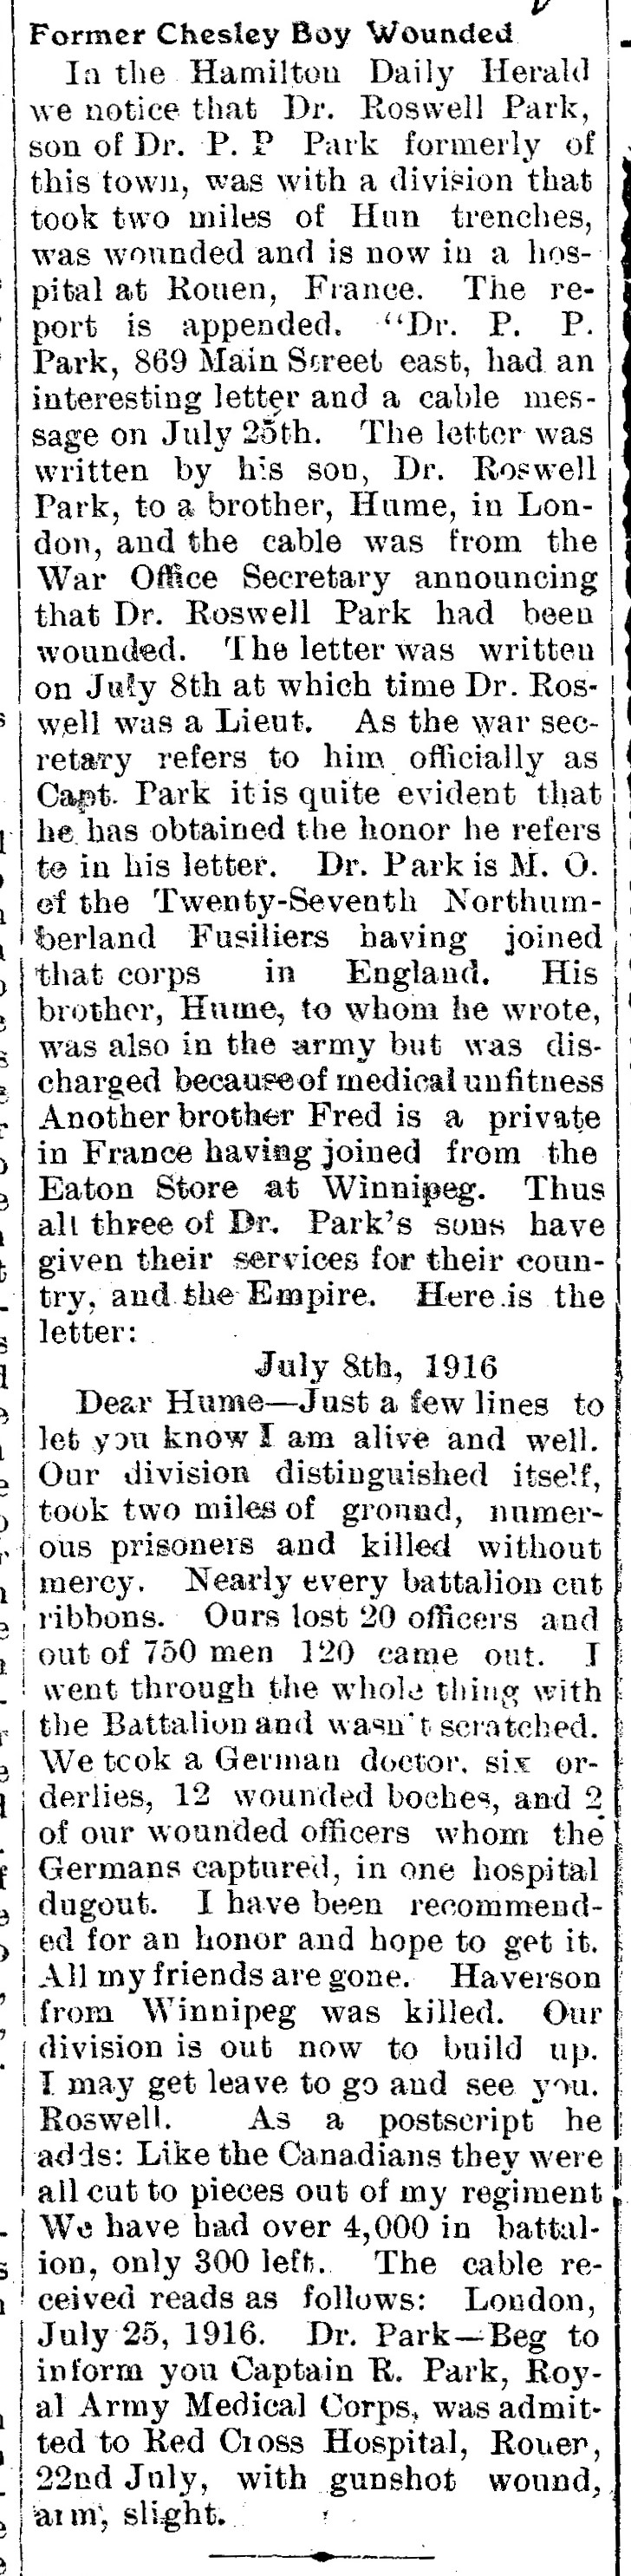 The Chesley Enterprise, August 3, 1916